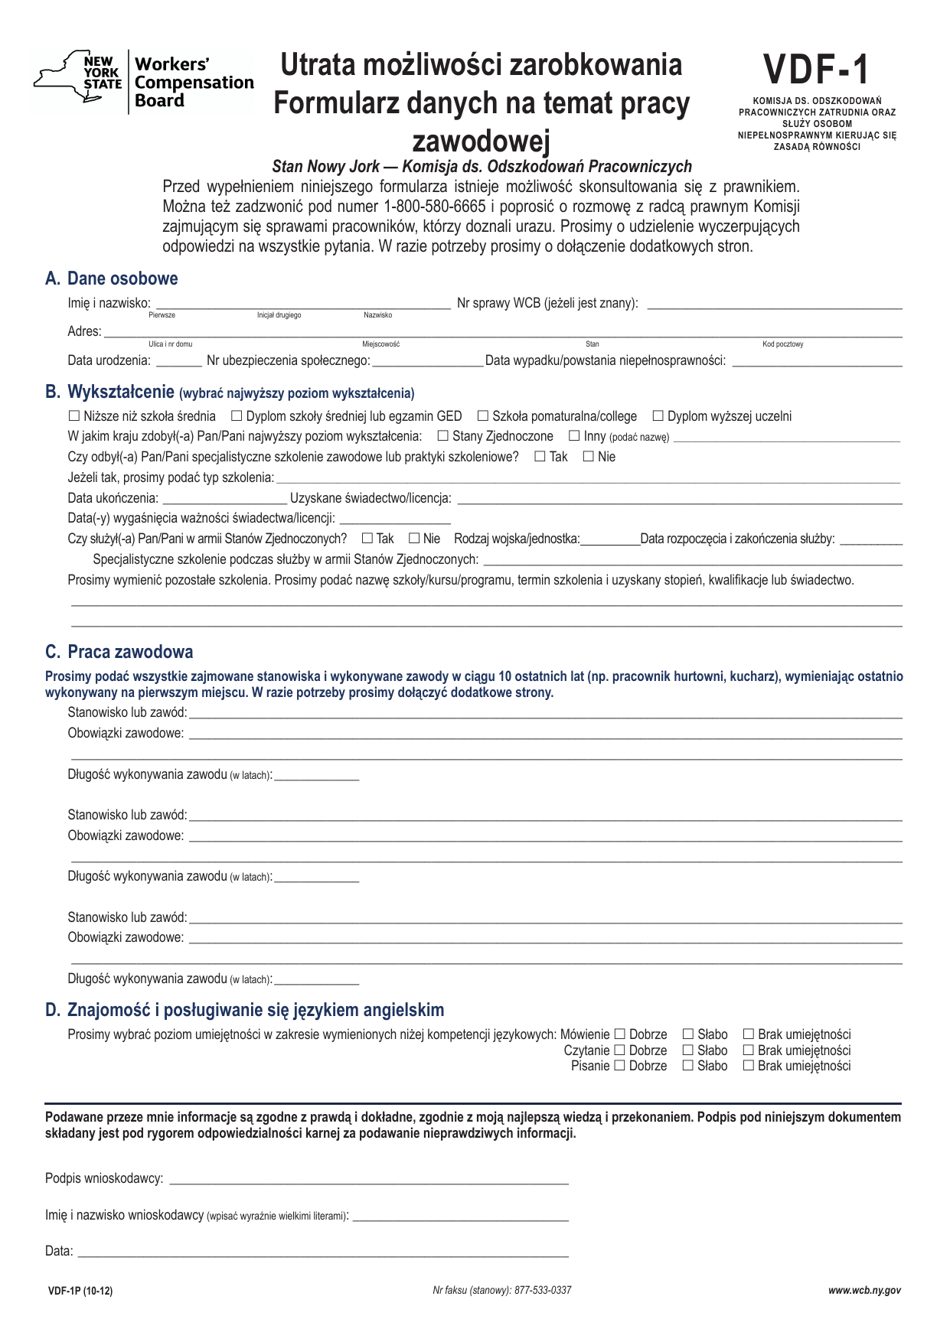 Form VDF-1P Loss of Wage Earning Capacity Vocational Data Form - New York (Polish), Page 1